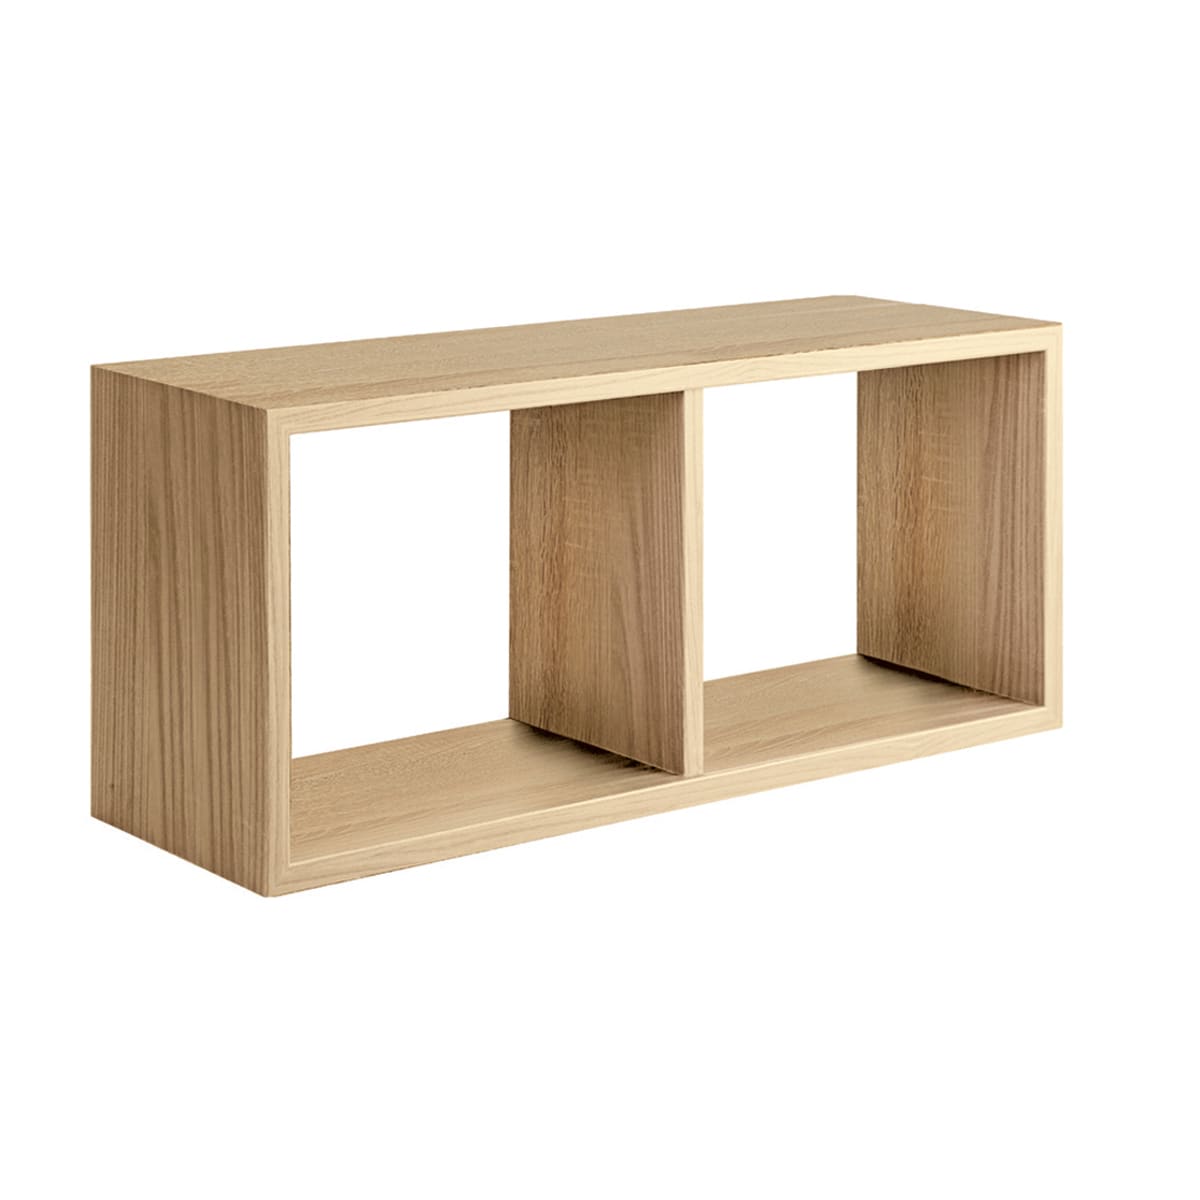 RECTANGULAR W70xD23.7xH30CM WITH 1 NATURAL OAK COLOUR WOOD DIVIDER